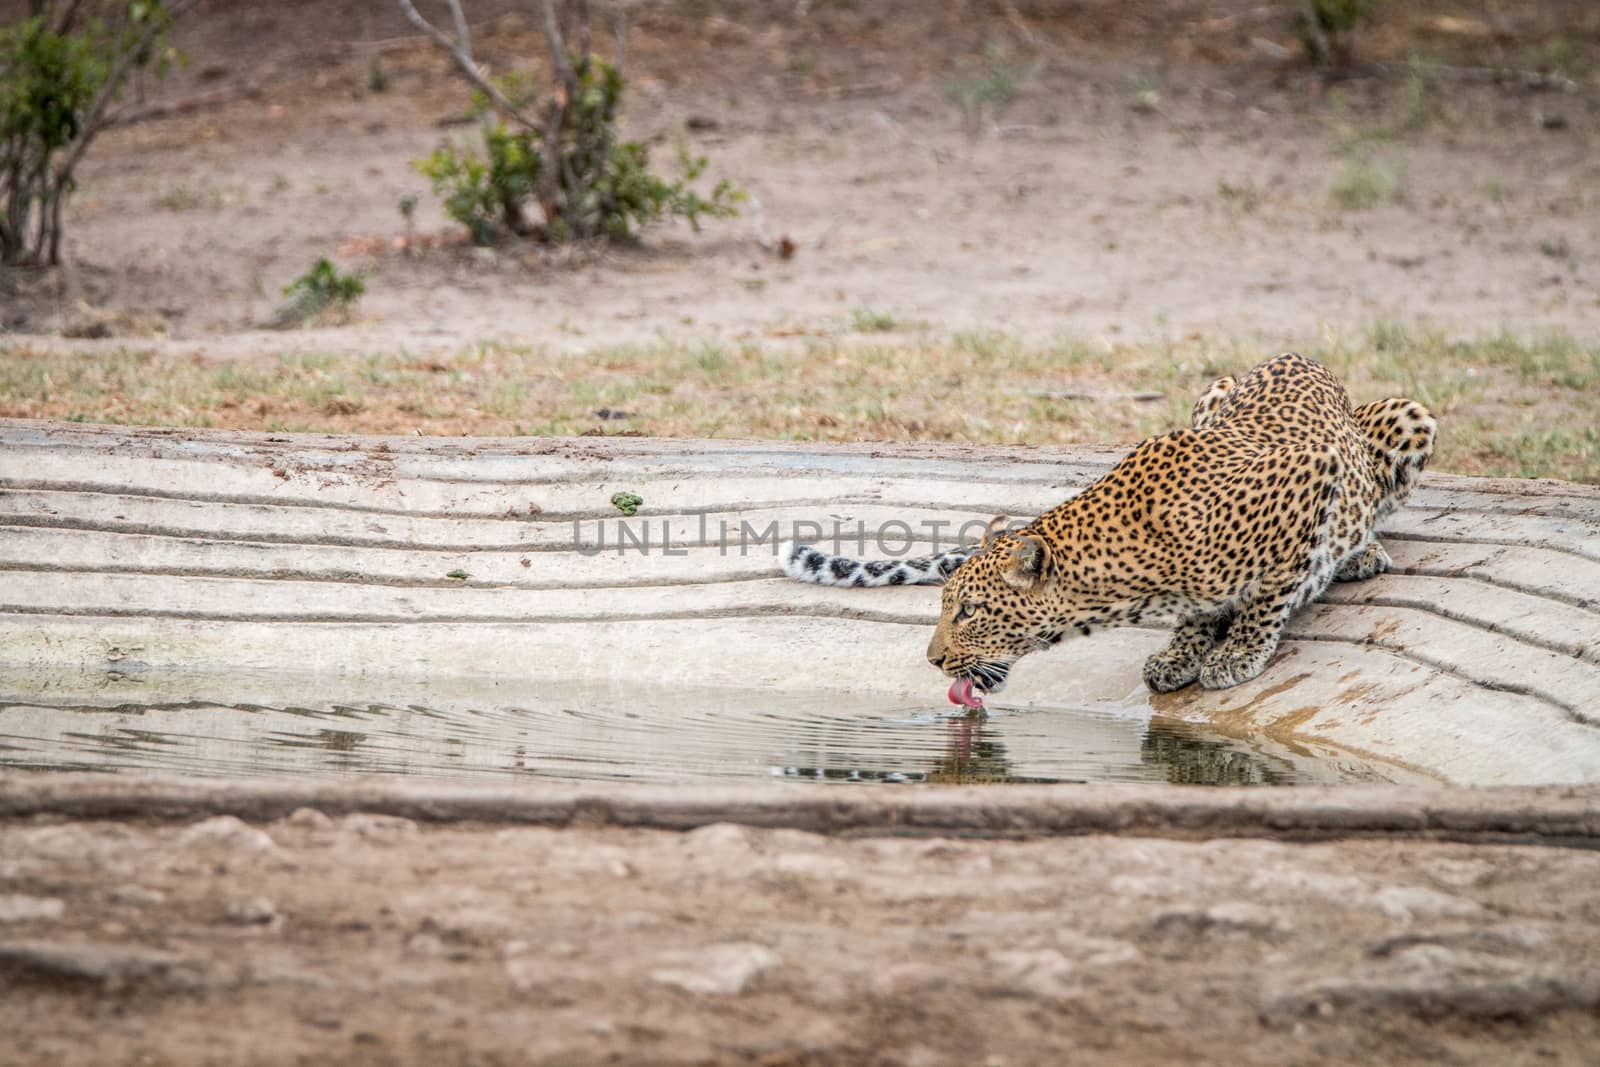 Drinking Leopard in the Kruger National Park by Simoneemanphotography